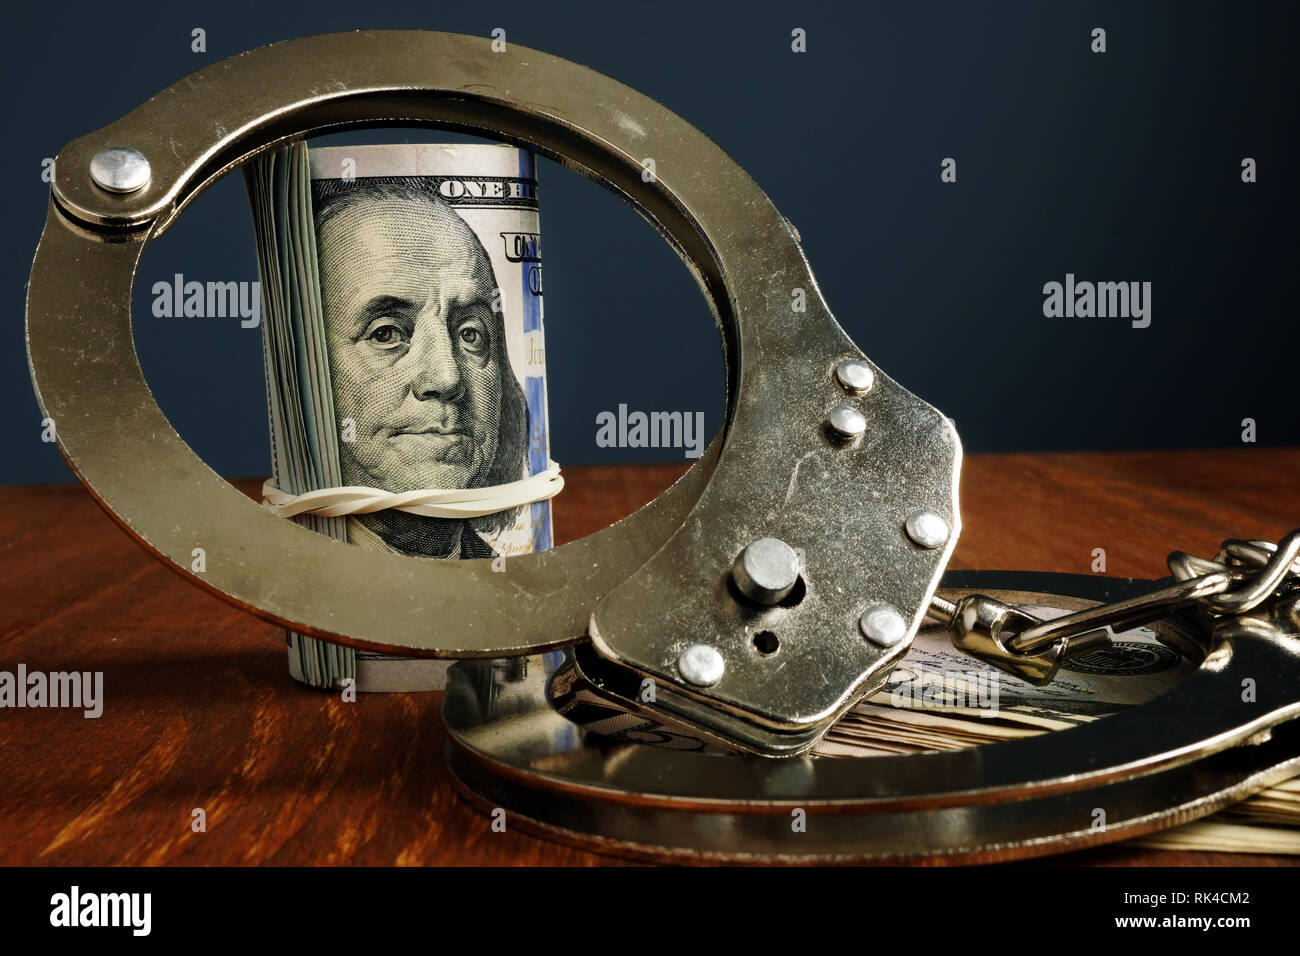 Penalty or bail bond concept. Money and handcuffs. Stock Photo